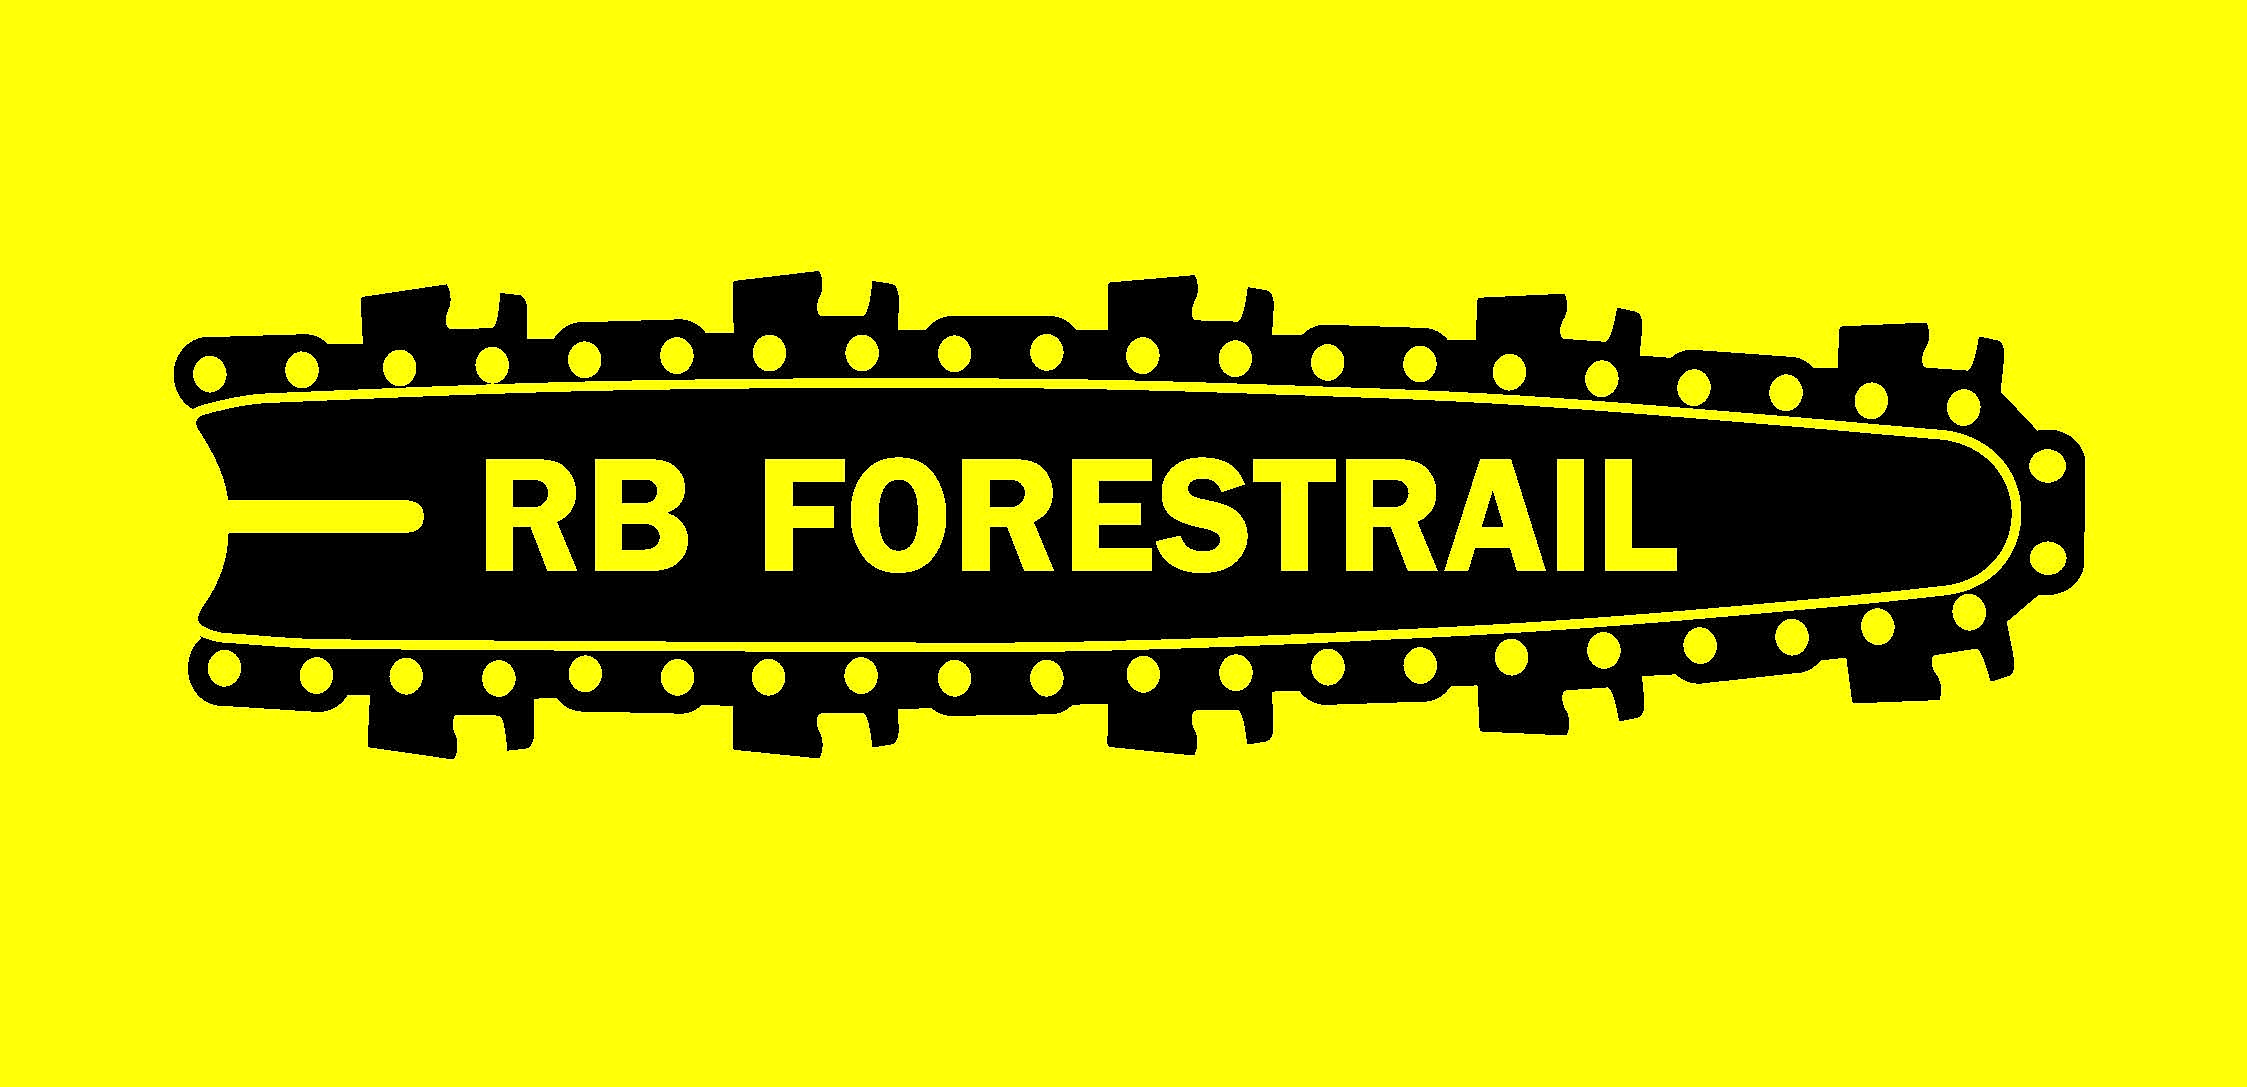 RB FORESTRAIL, SIA